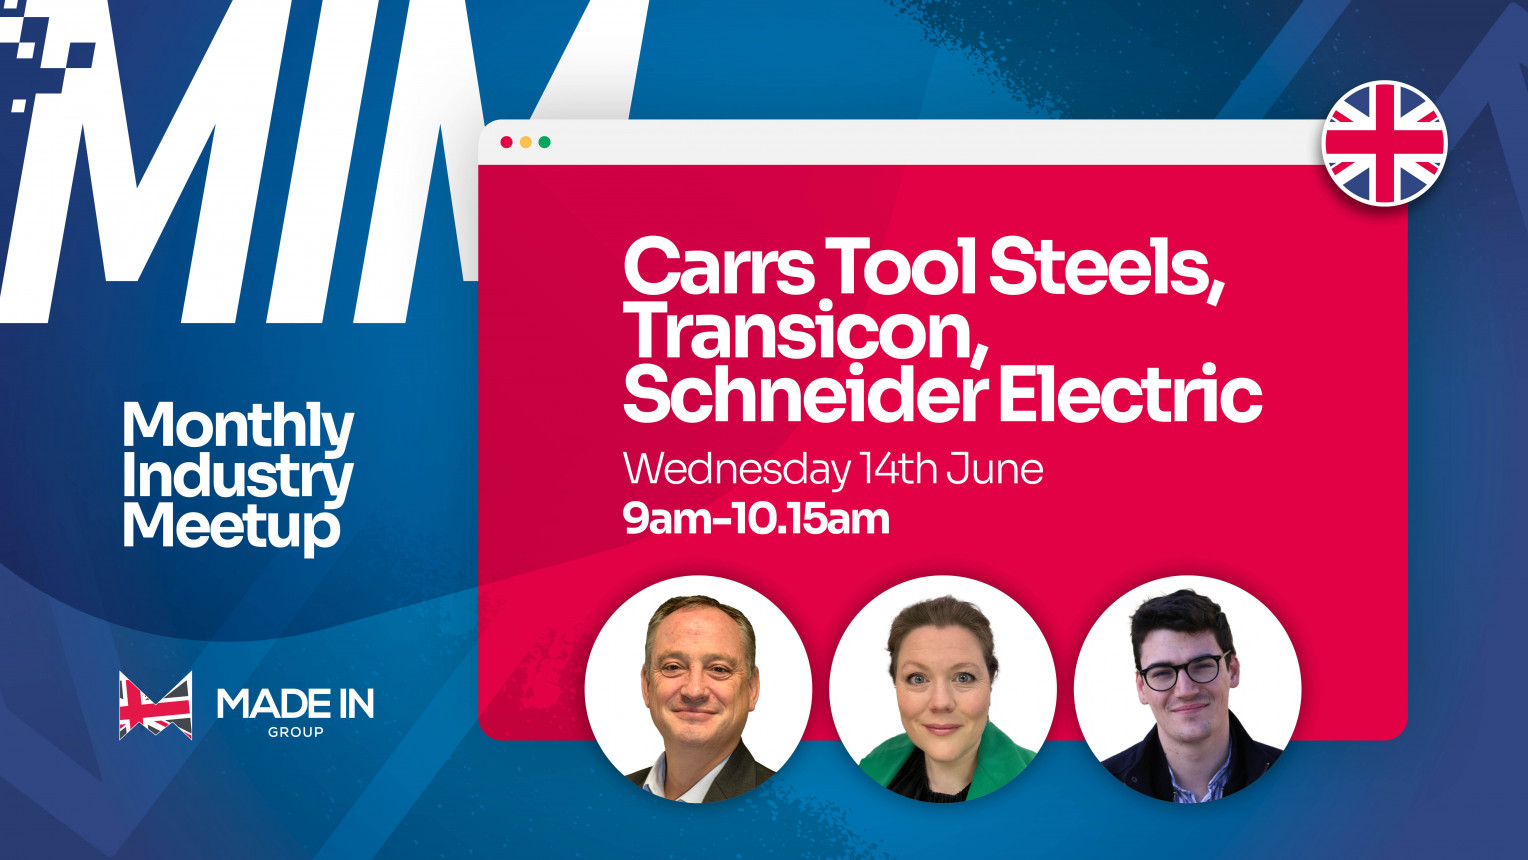 Monthly Industry Meetup with Carrs Tool Steels, Transicon and Schneider Electric